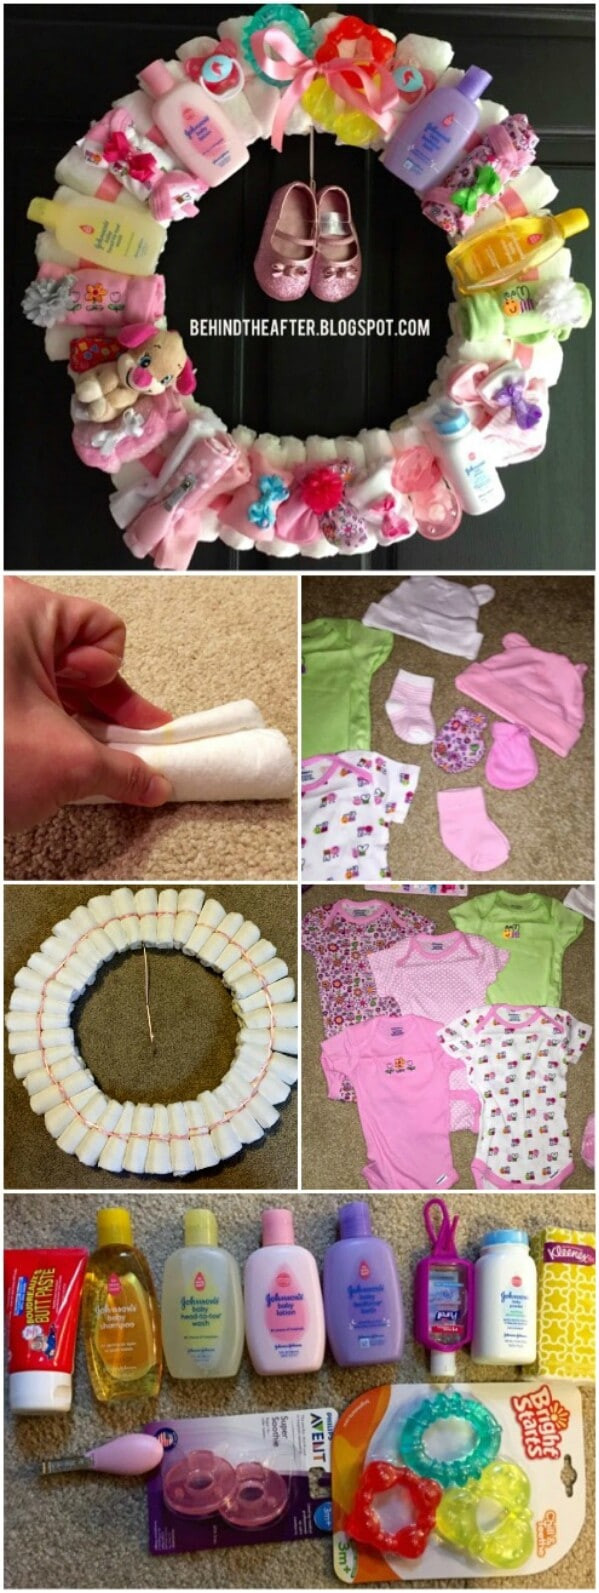 Babyshower Gift Ideas
 25 Enchantingly Adorable Baby Shower Gift Ideas That Will